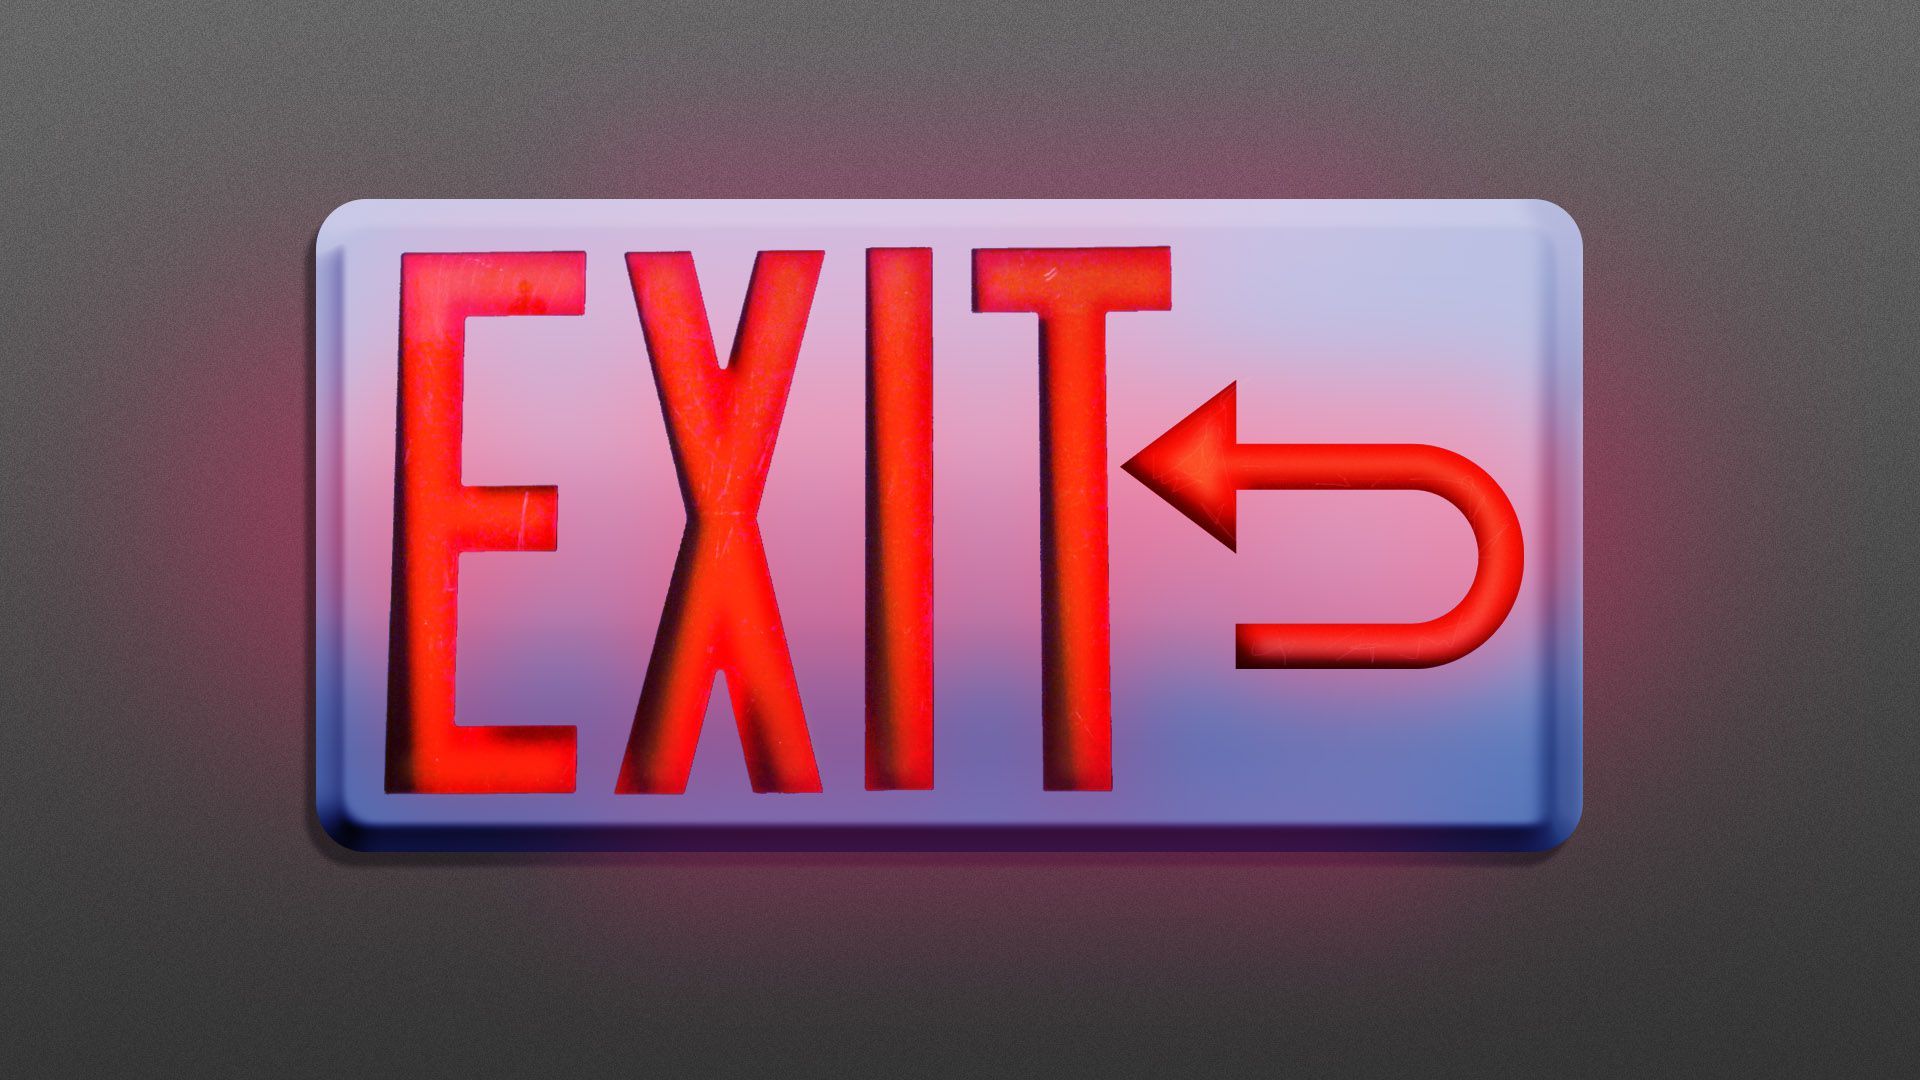 Illustration of an exit sign with a return symbol in place of an arrow